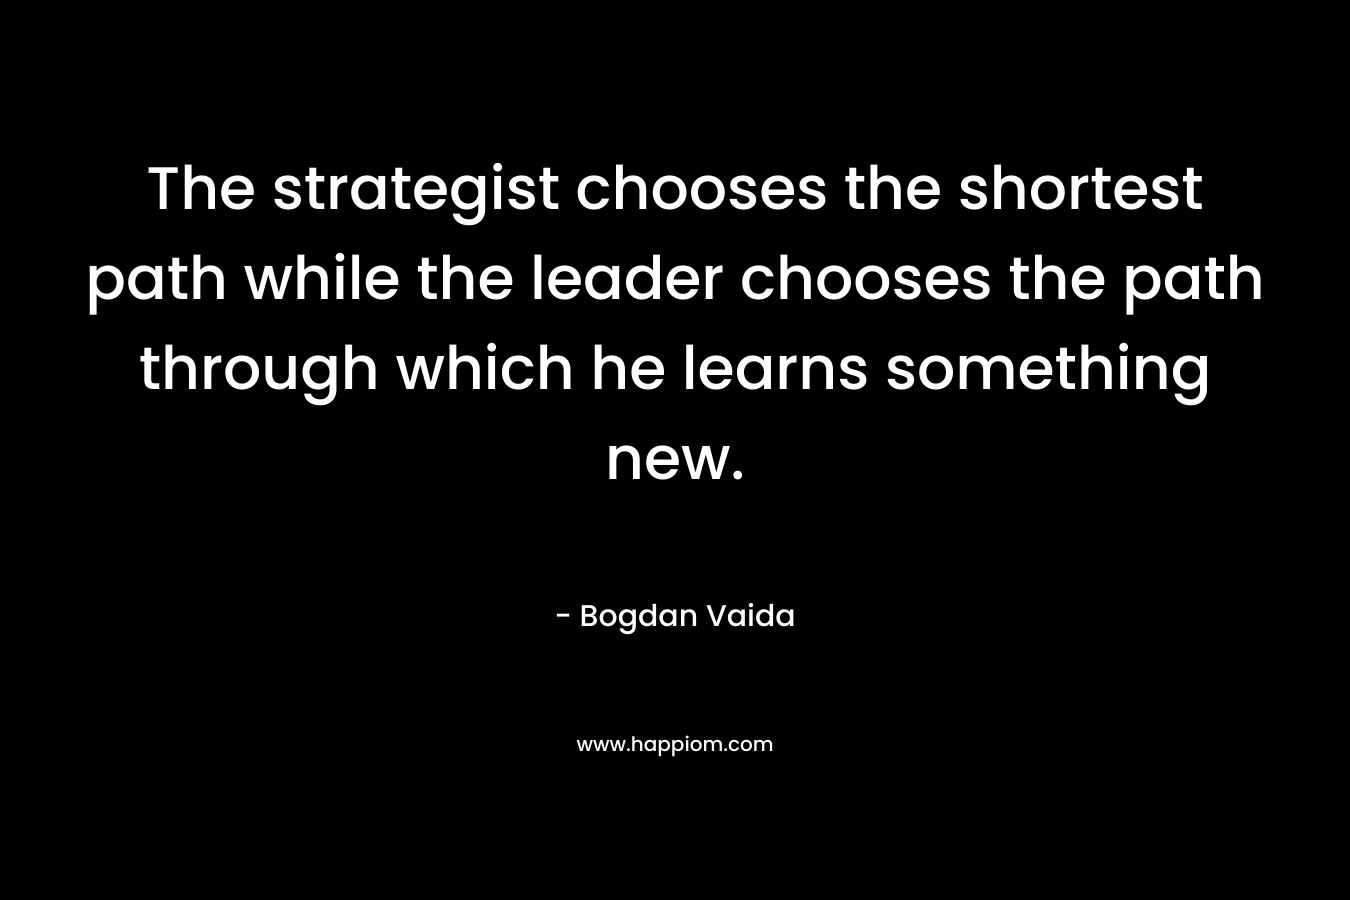 The strategist chooses the shortest path while the leader chooses the path through which he learns something new. – Bogdan Vaida